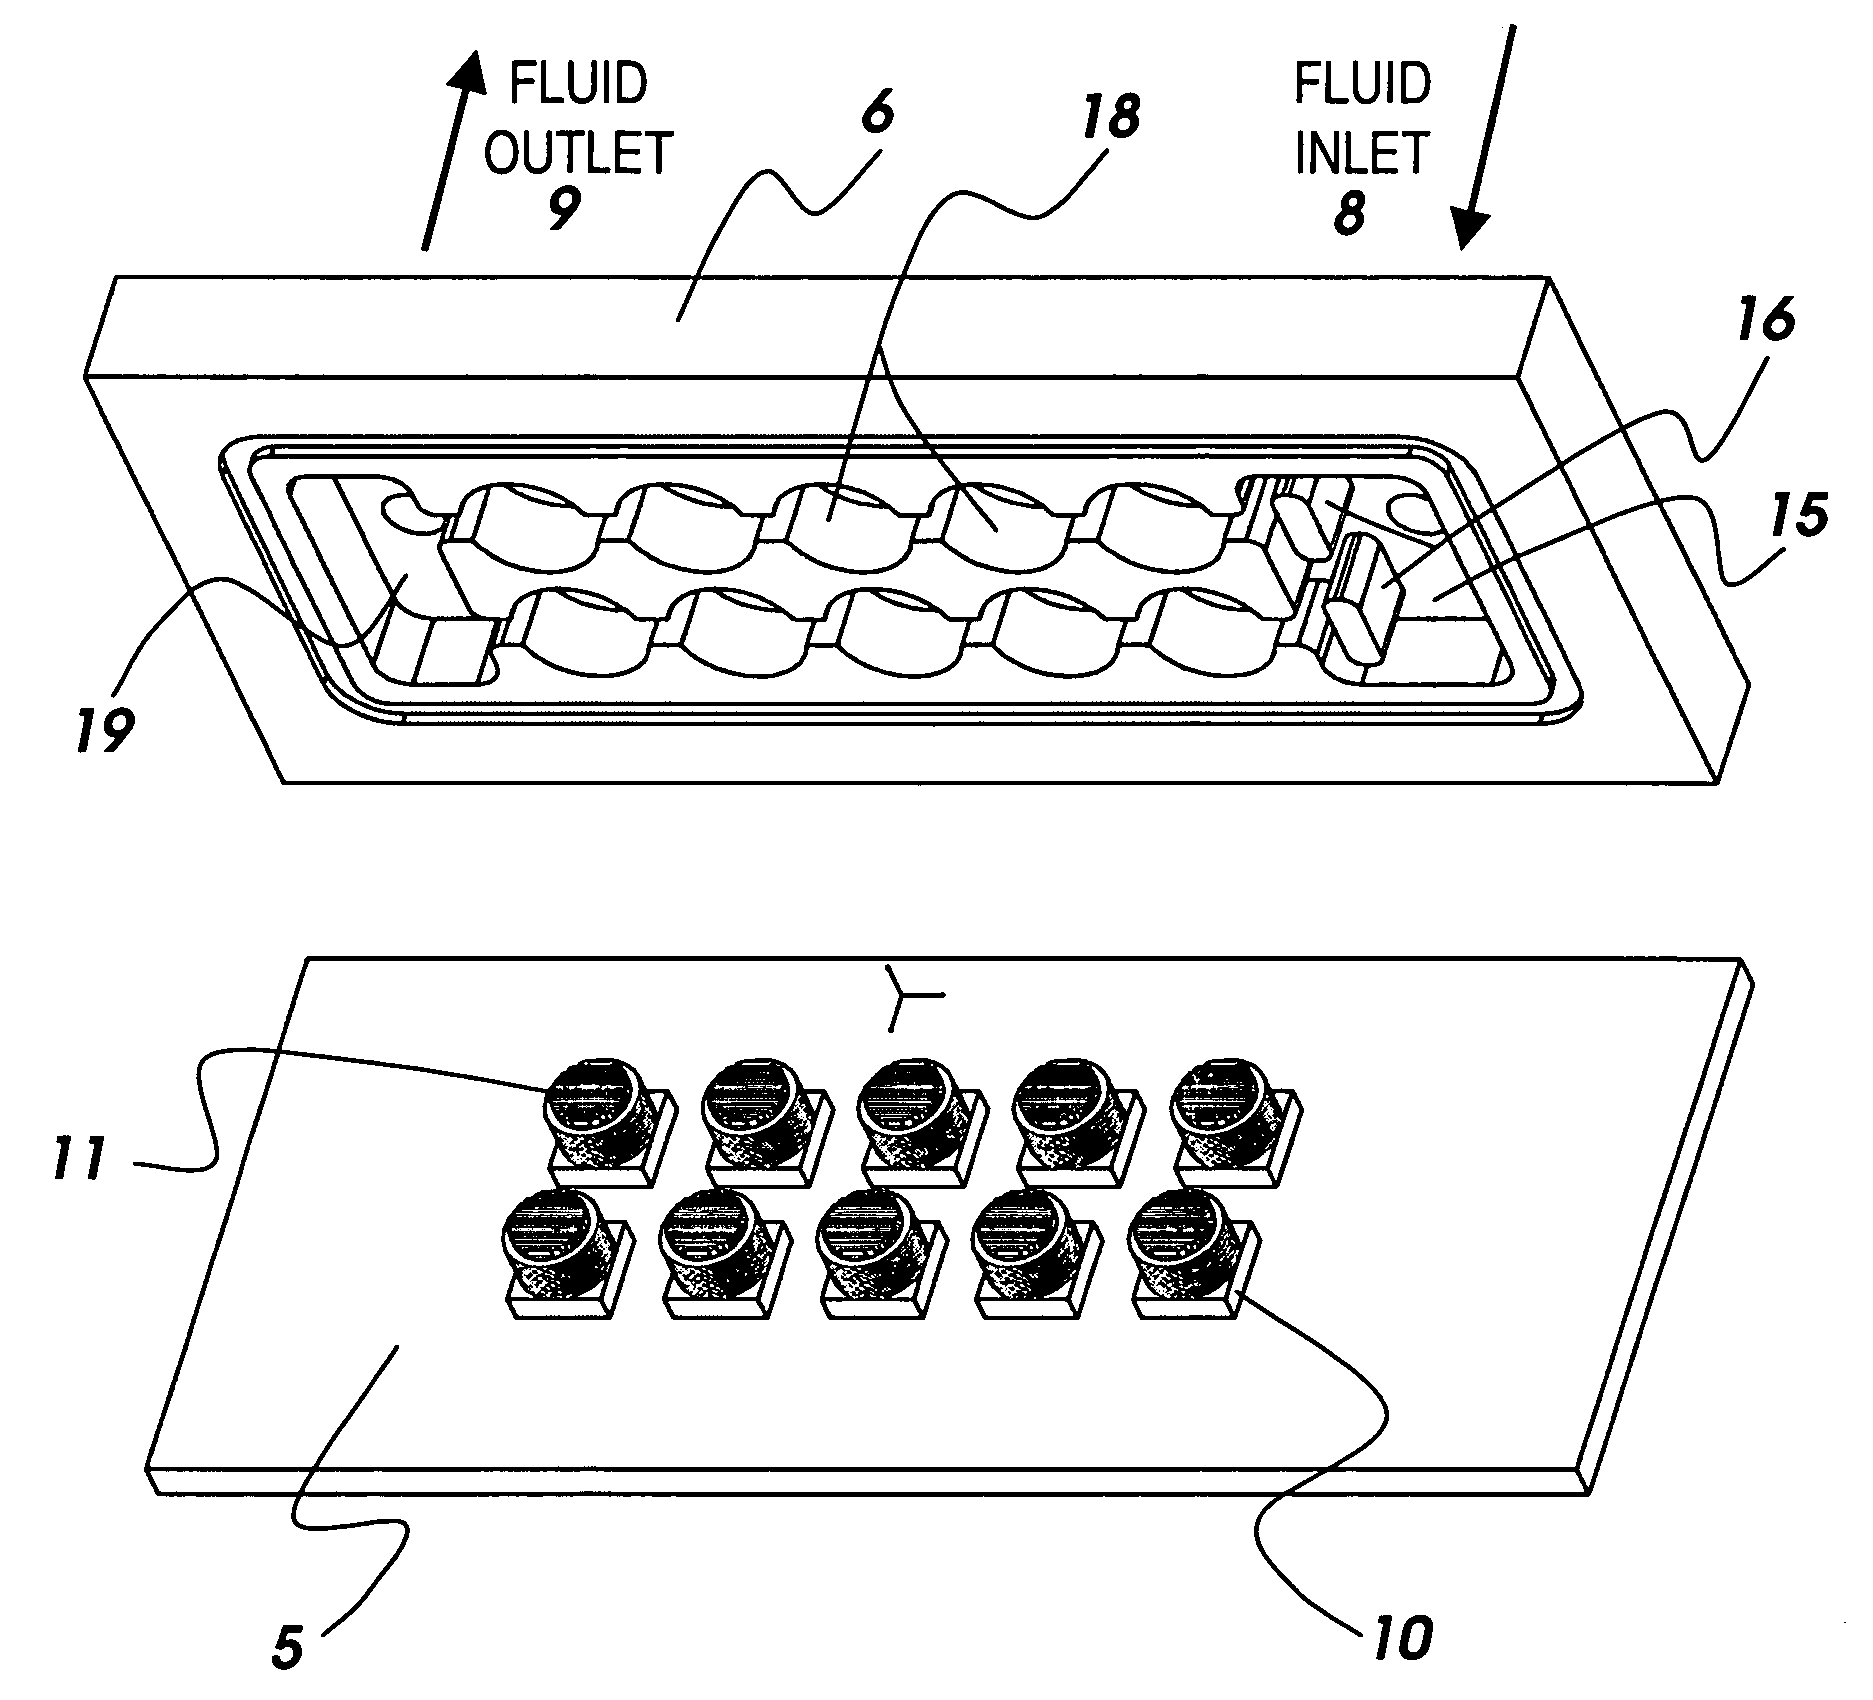 Apparatus for heat transfer and critical heat flux enhancement